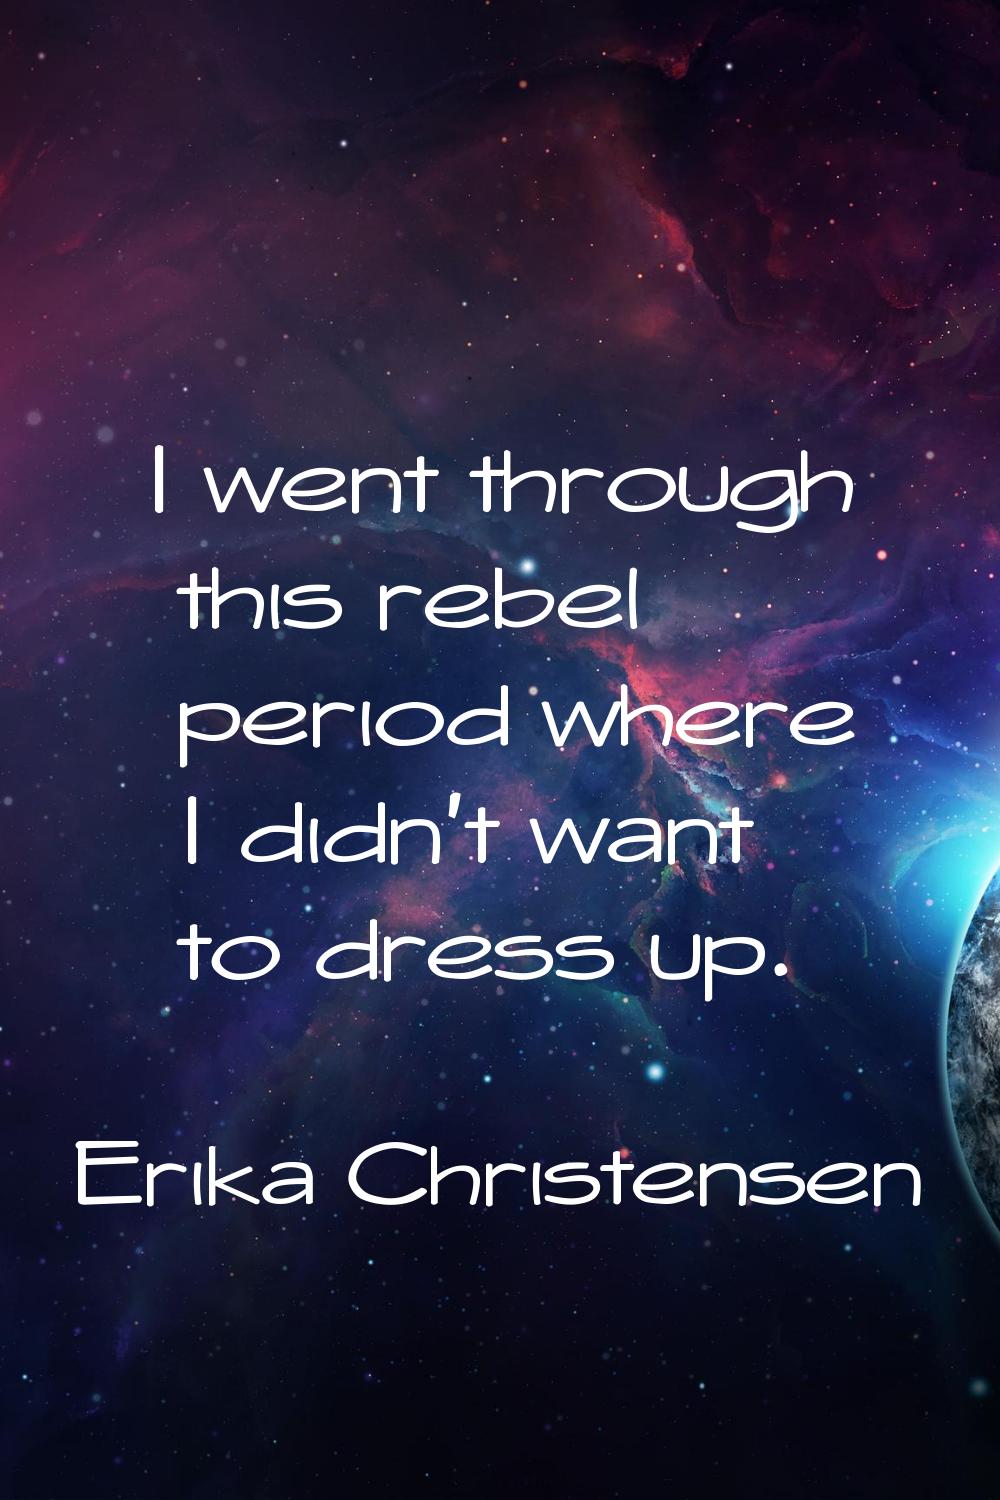 I went through this rebel period where I didn't want to dress up.